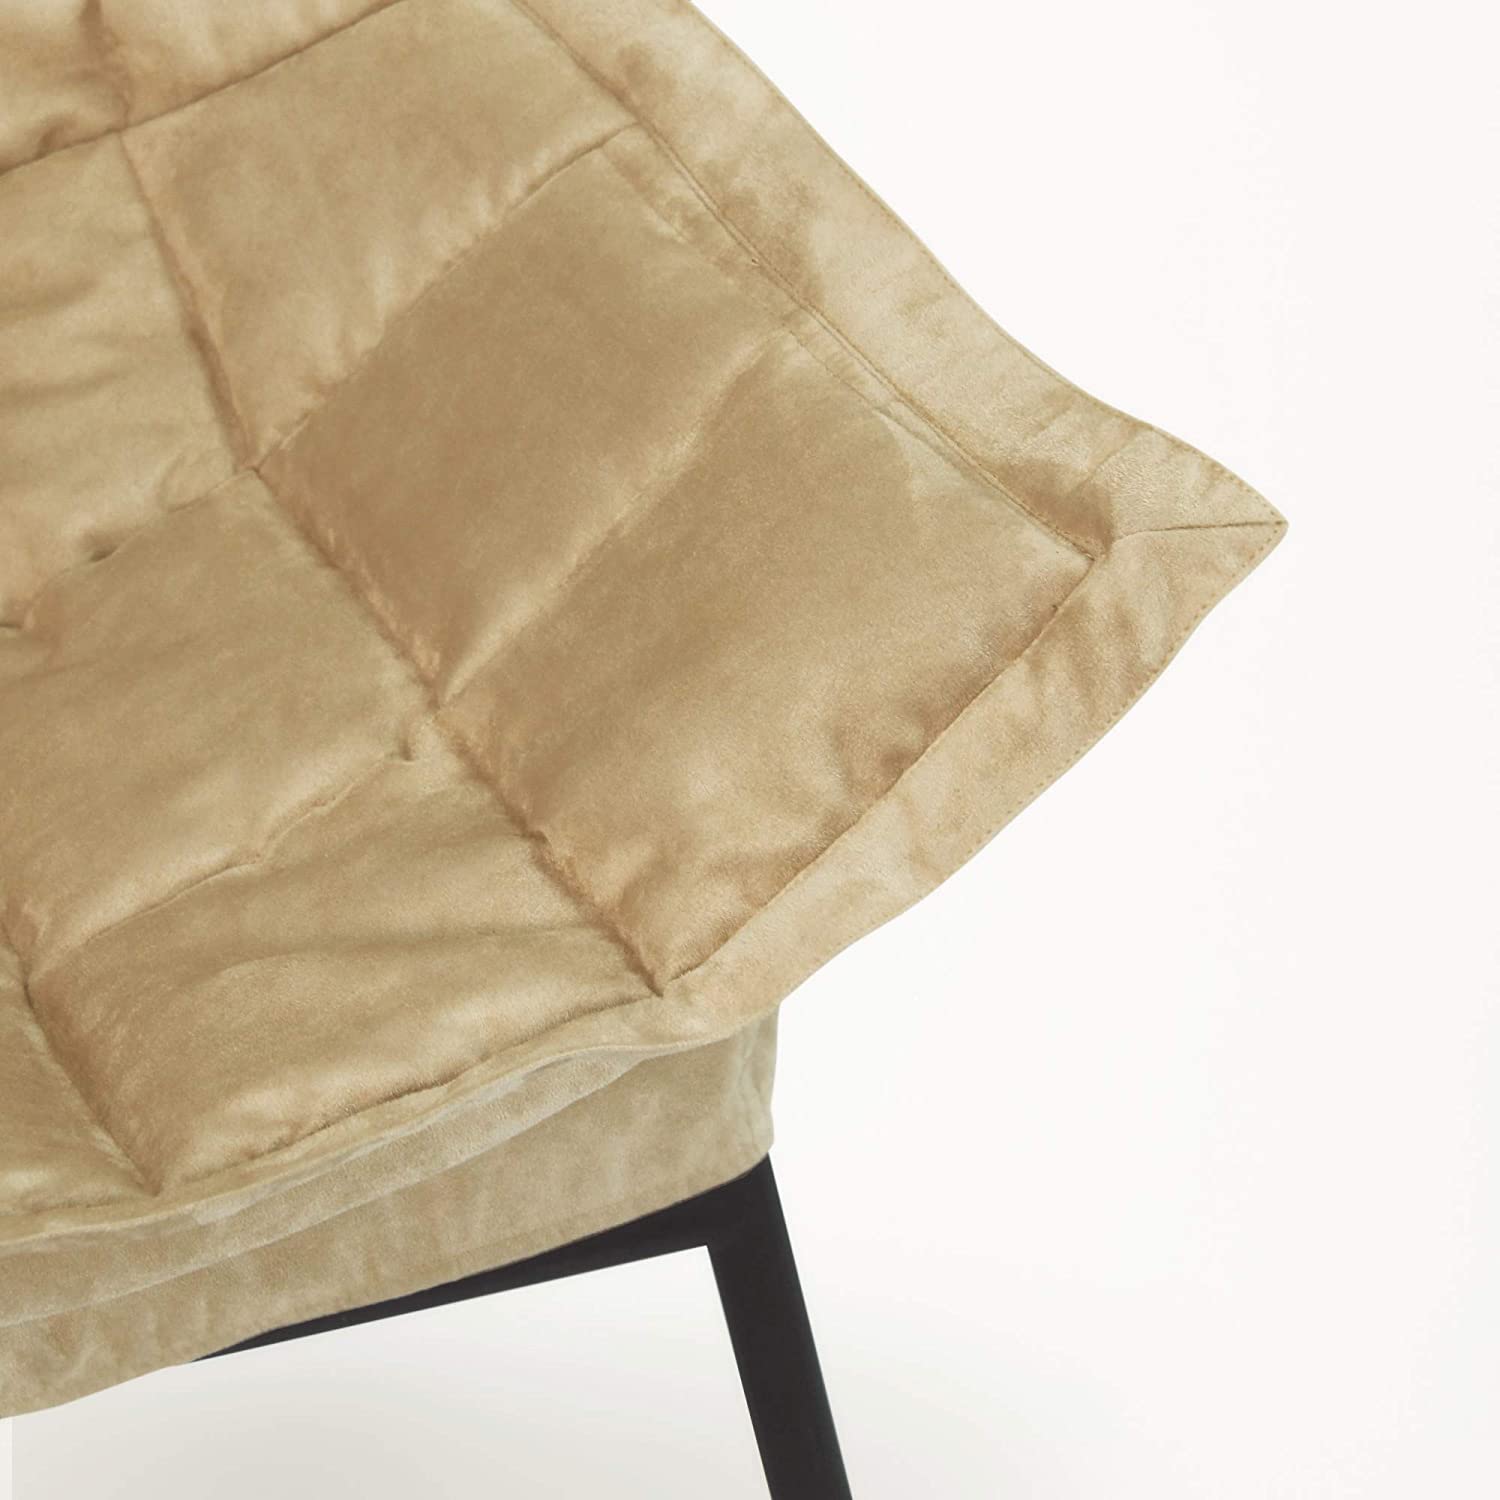 Casual Home Milano Chair with Black Metal Frame and Microsuede Outer Cover, Tan